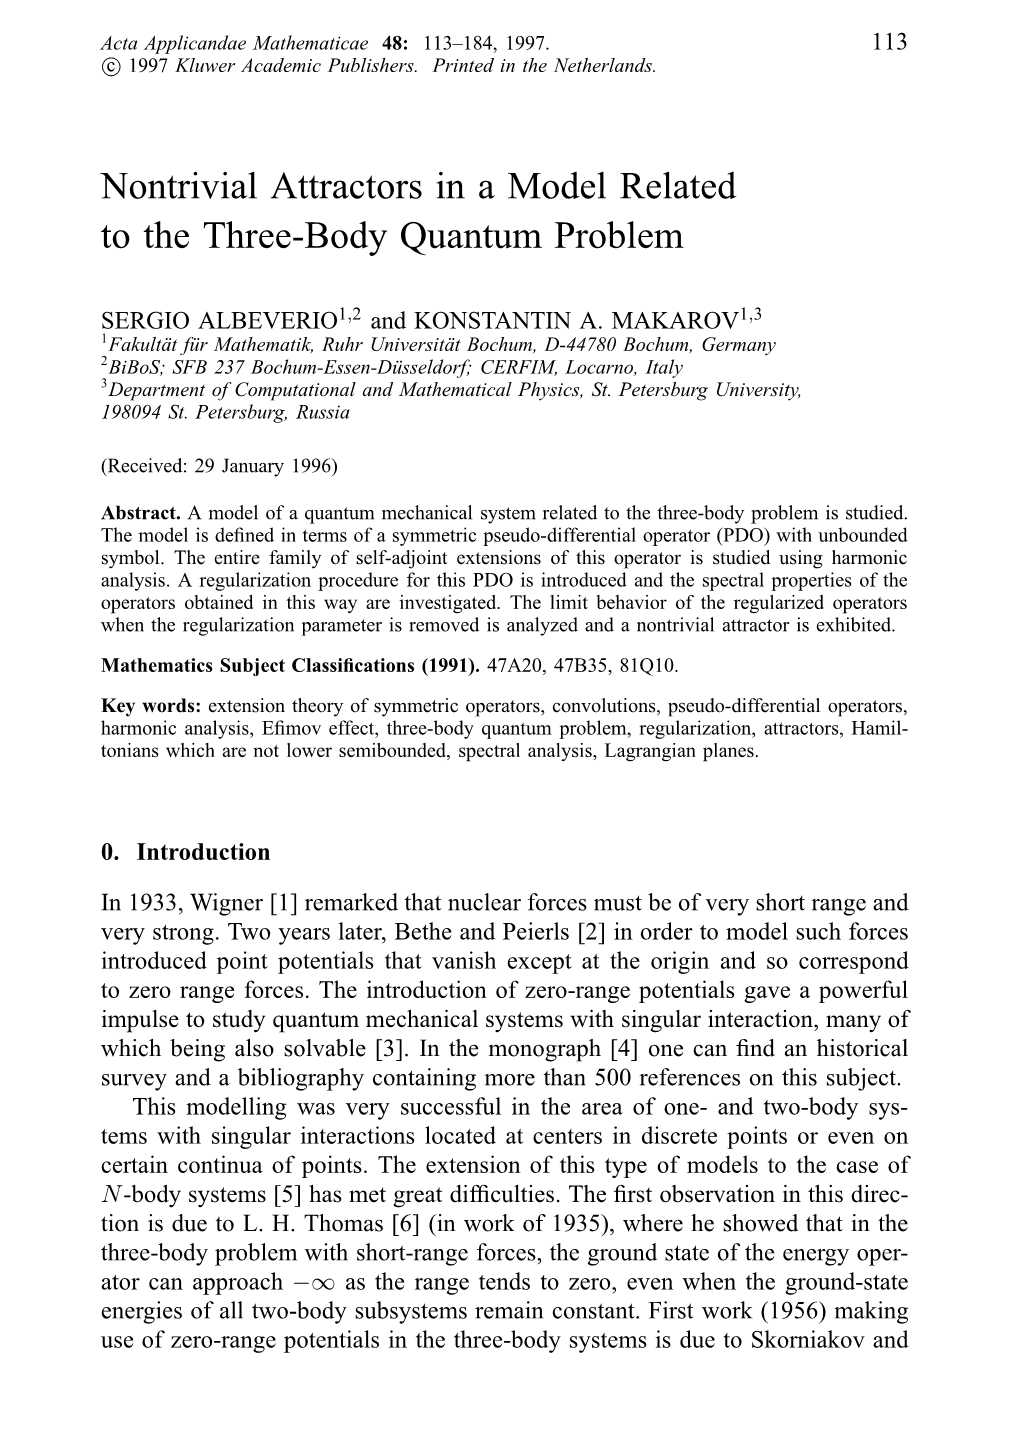 Nontrivial Attractors in a Model Related to the Three-Body Quantum Problem